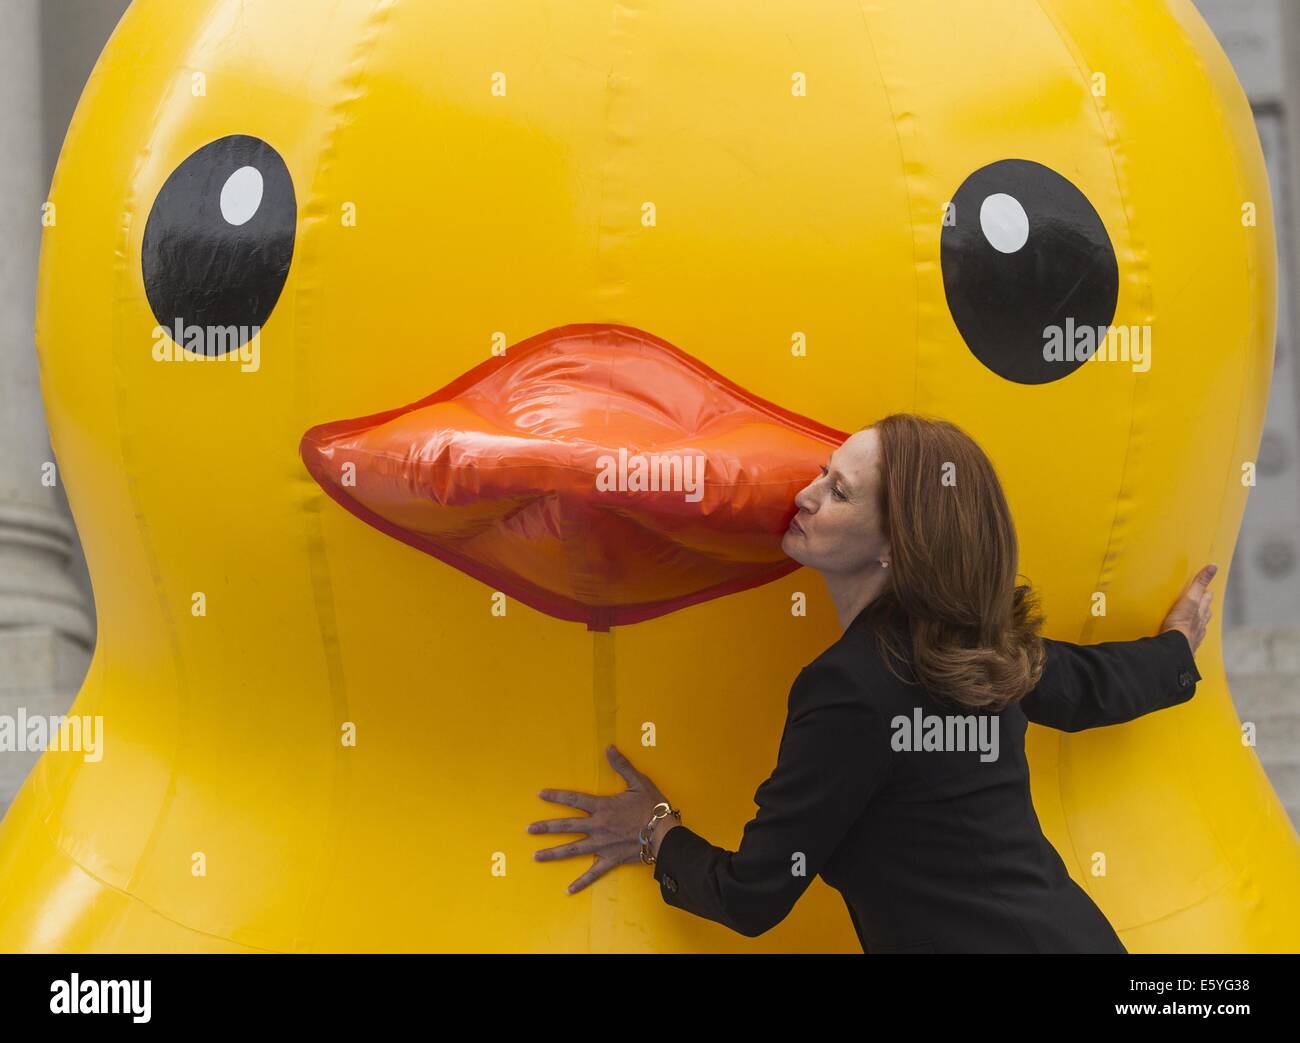 Los Angeles, California, USA. 8th Aug, 2014. AMY WAKELAND, wife of Los Angeles Mayor Eric Garcettia, poses with a 10-foot-tall rubber ducky ''baby duck'' squatting on the Spring Street steps of Los Angeles City Hall. The bright yellow, inflatable ducky is wandering the city in search of its mother, a 60 feet high and dubbed by event organizers as the world's largest rubber ducky as part of a promotional stunt for the Tall Ships Festival taking place Aug. 20-24 at the Port of Los Angeles. © Ringo Chiu/ZUMA Wire/Alamy Live News Stock Photo